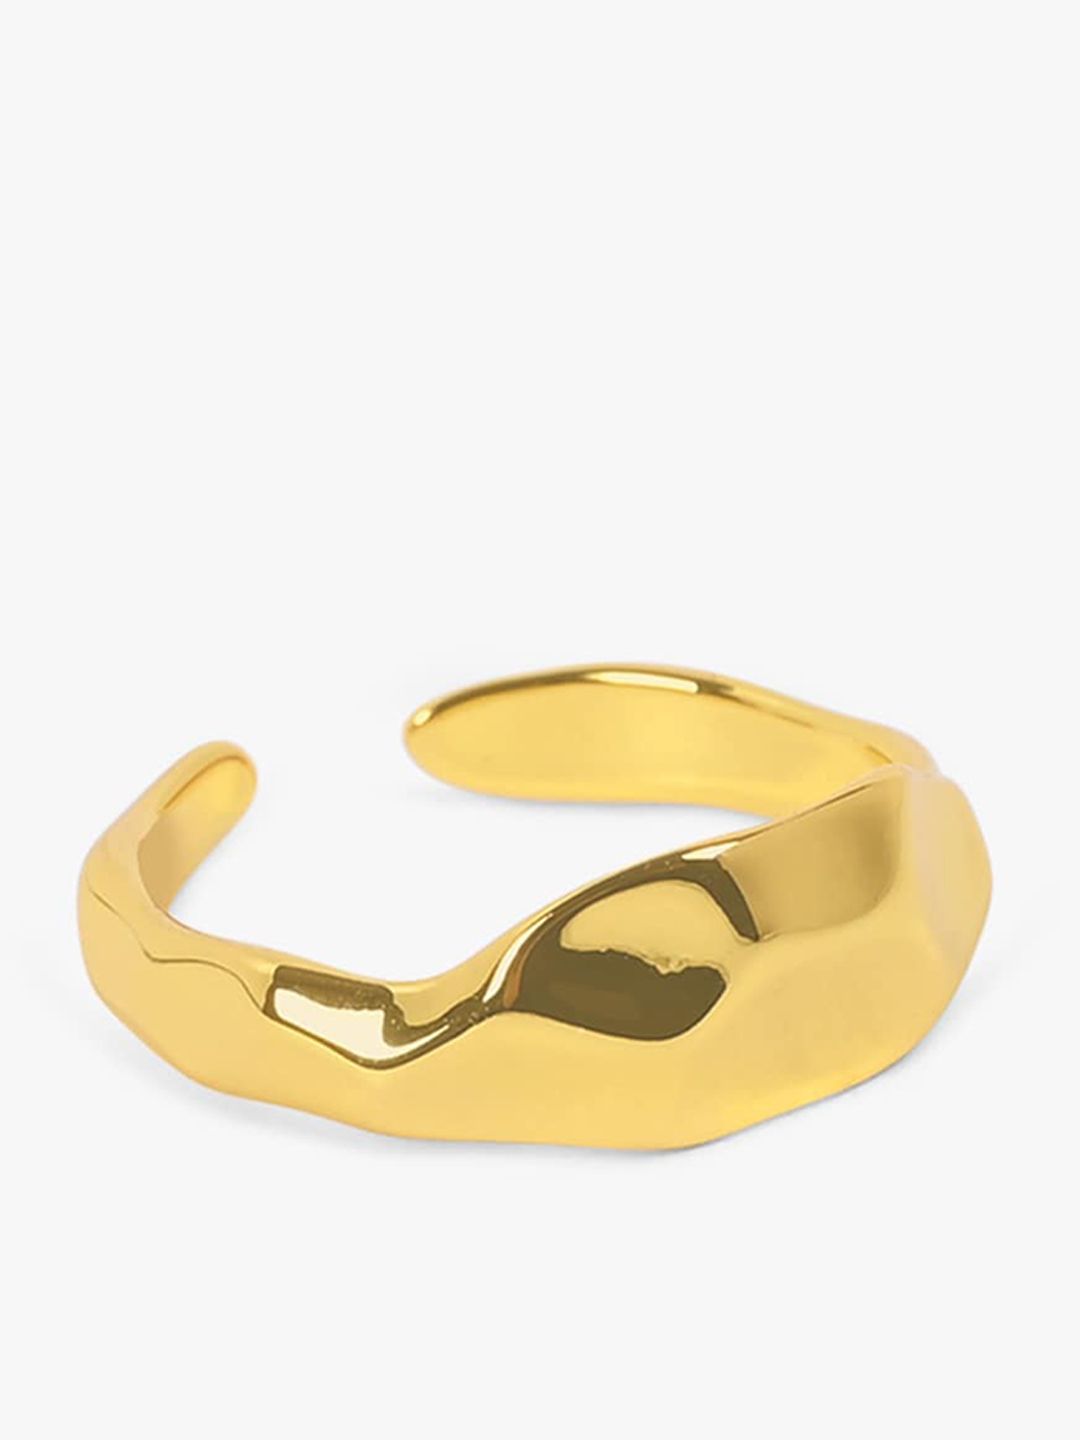 Mikoto by FableStreet Gold-Toned Gold-Plated Finger Ring Price in India